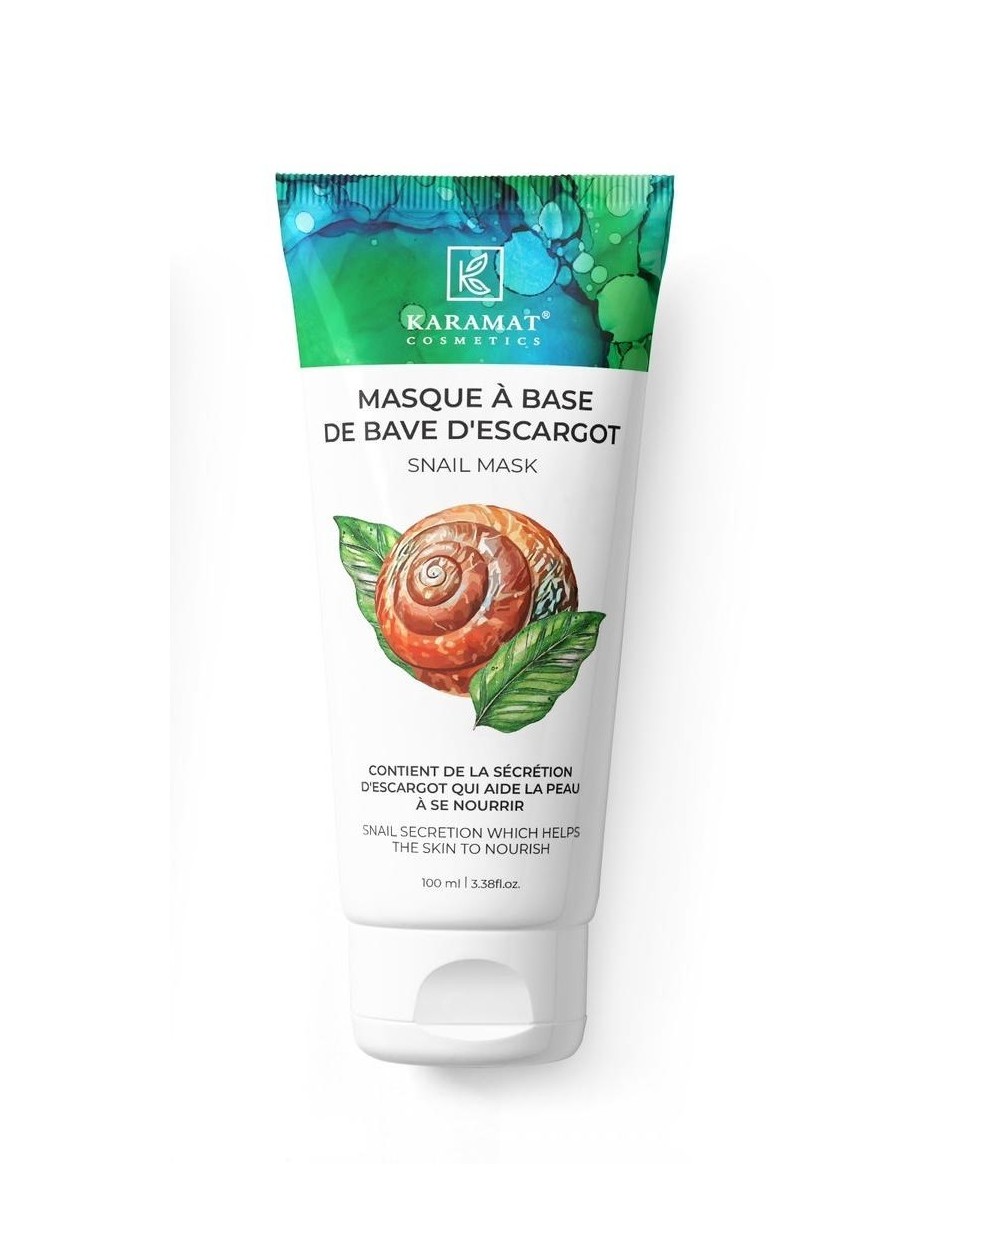 Mask that contains snail secretion to help nourish the skin